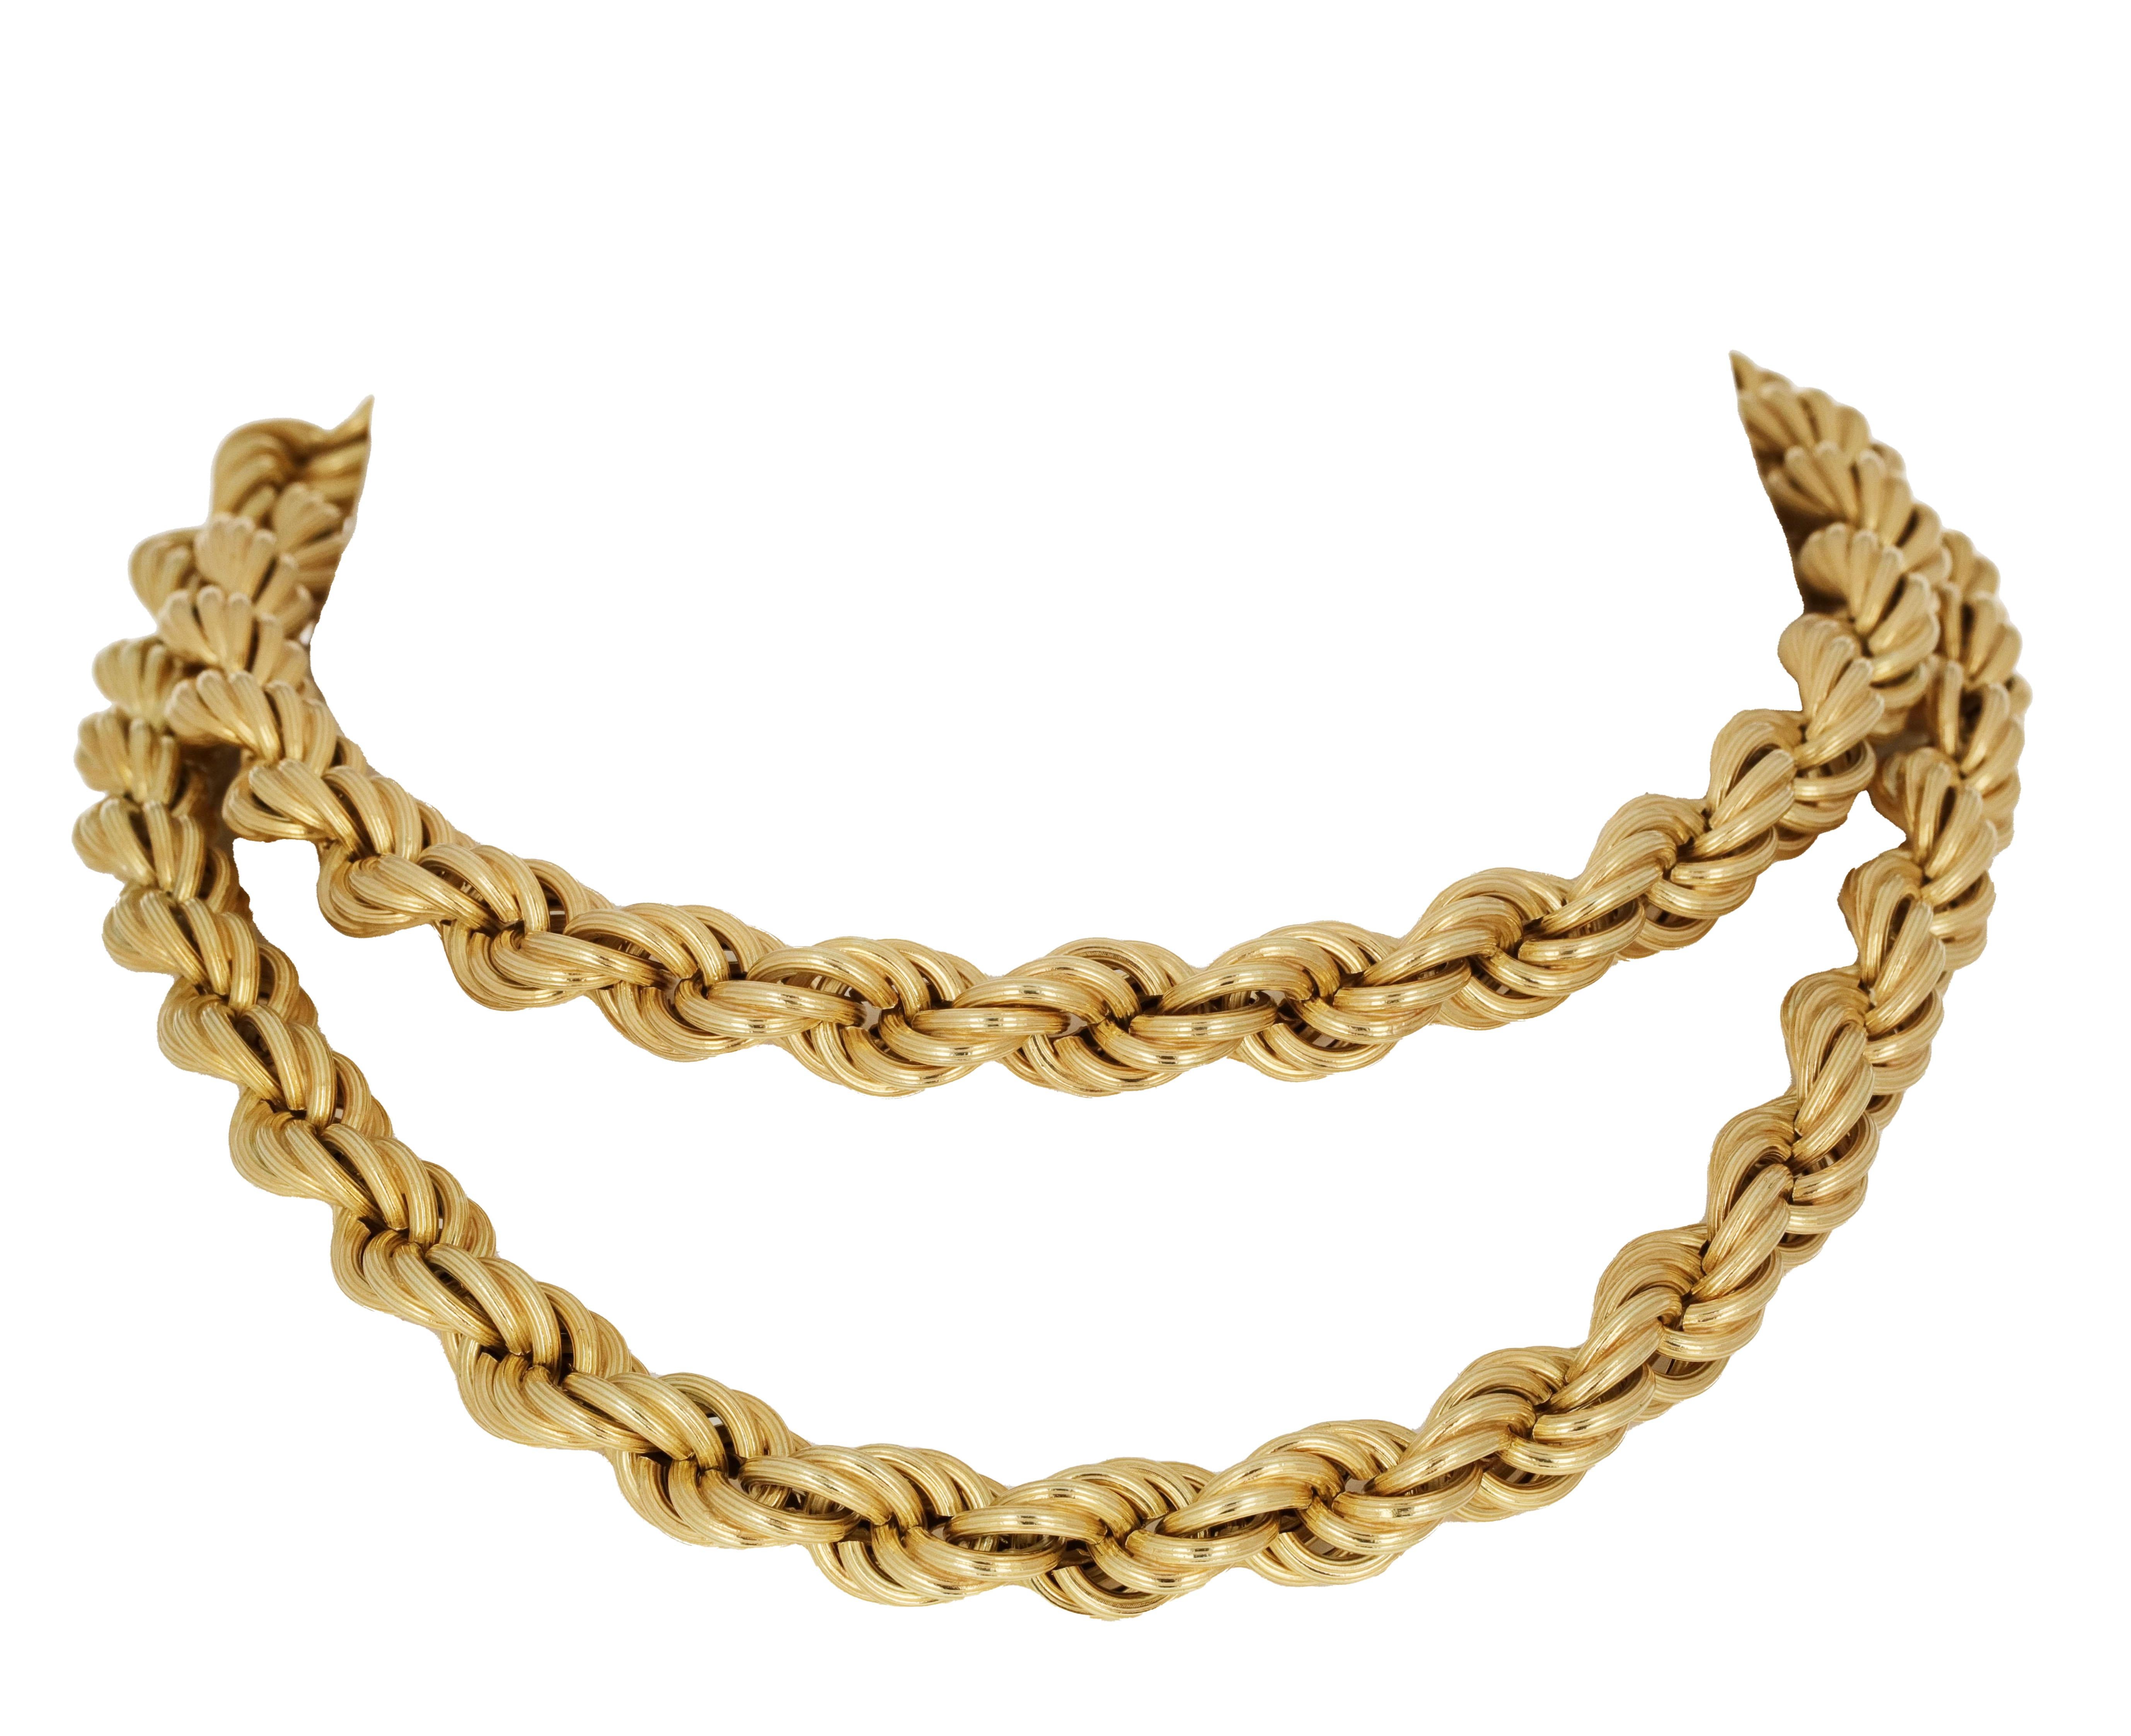 Vintage, UnoAErre, 14-karat yellow gold twisted rope chain necklace and bracelet set. These versatile pieces allow you multiple ways to showcase the bracelet and necklace. The necklace and bracelet can be worn separately or connected to make a long